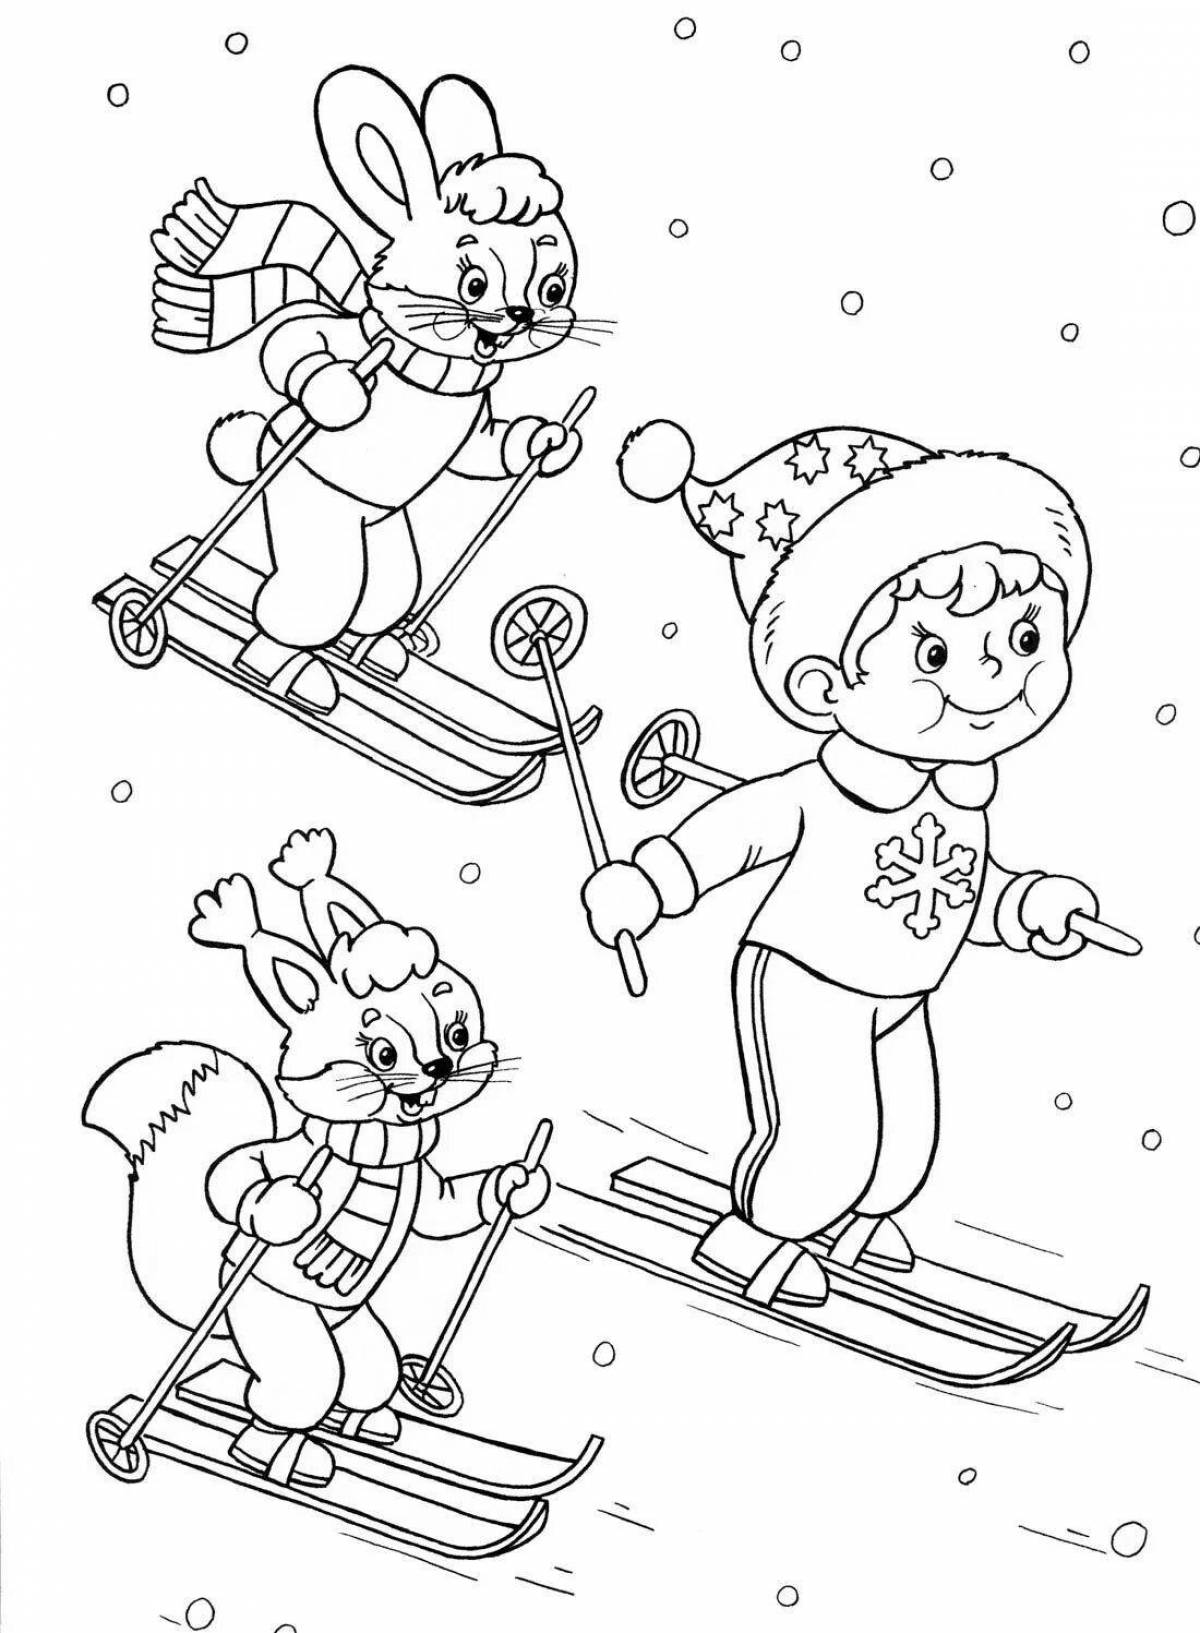 Winter sports for children 4 5 years old #5